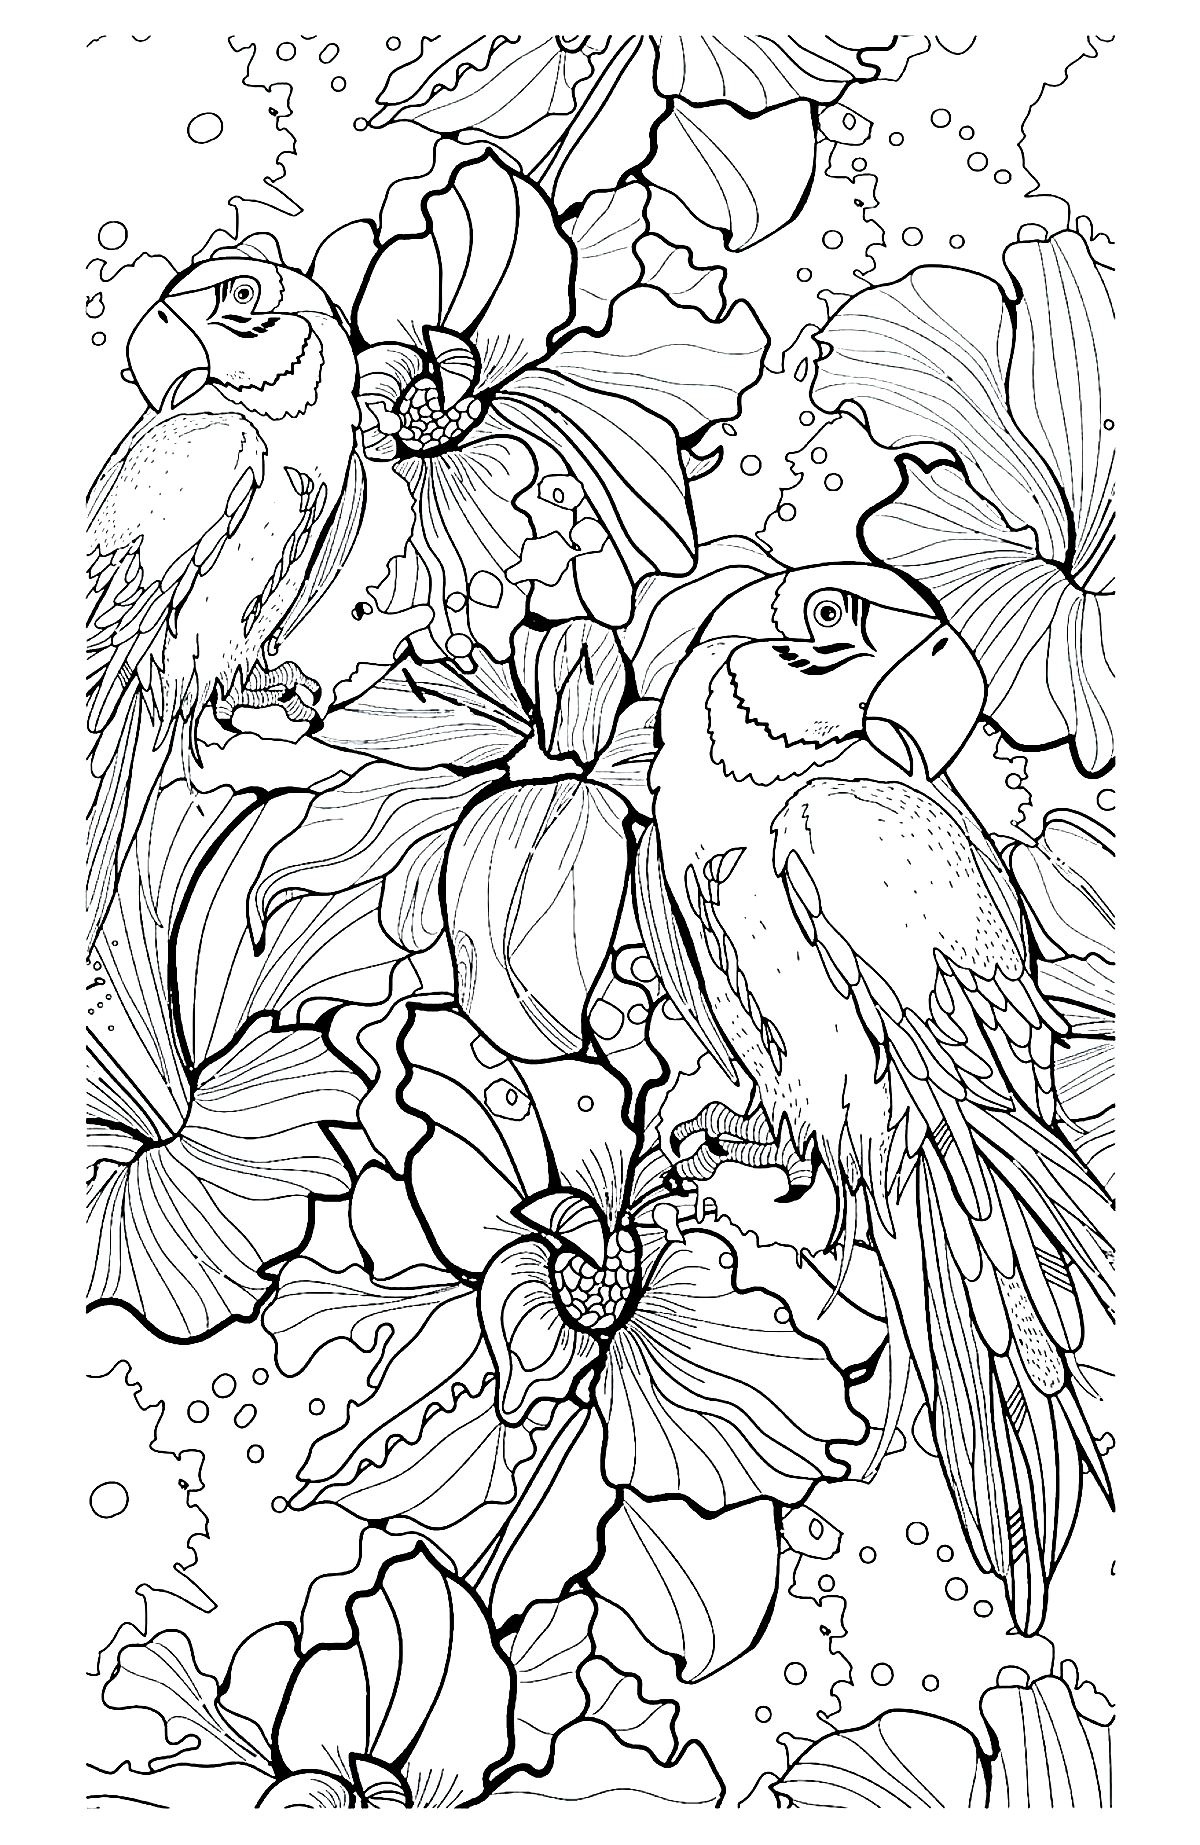 6 image=animaux coloriage adulte difficile perroquets 1